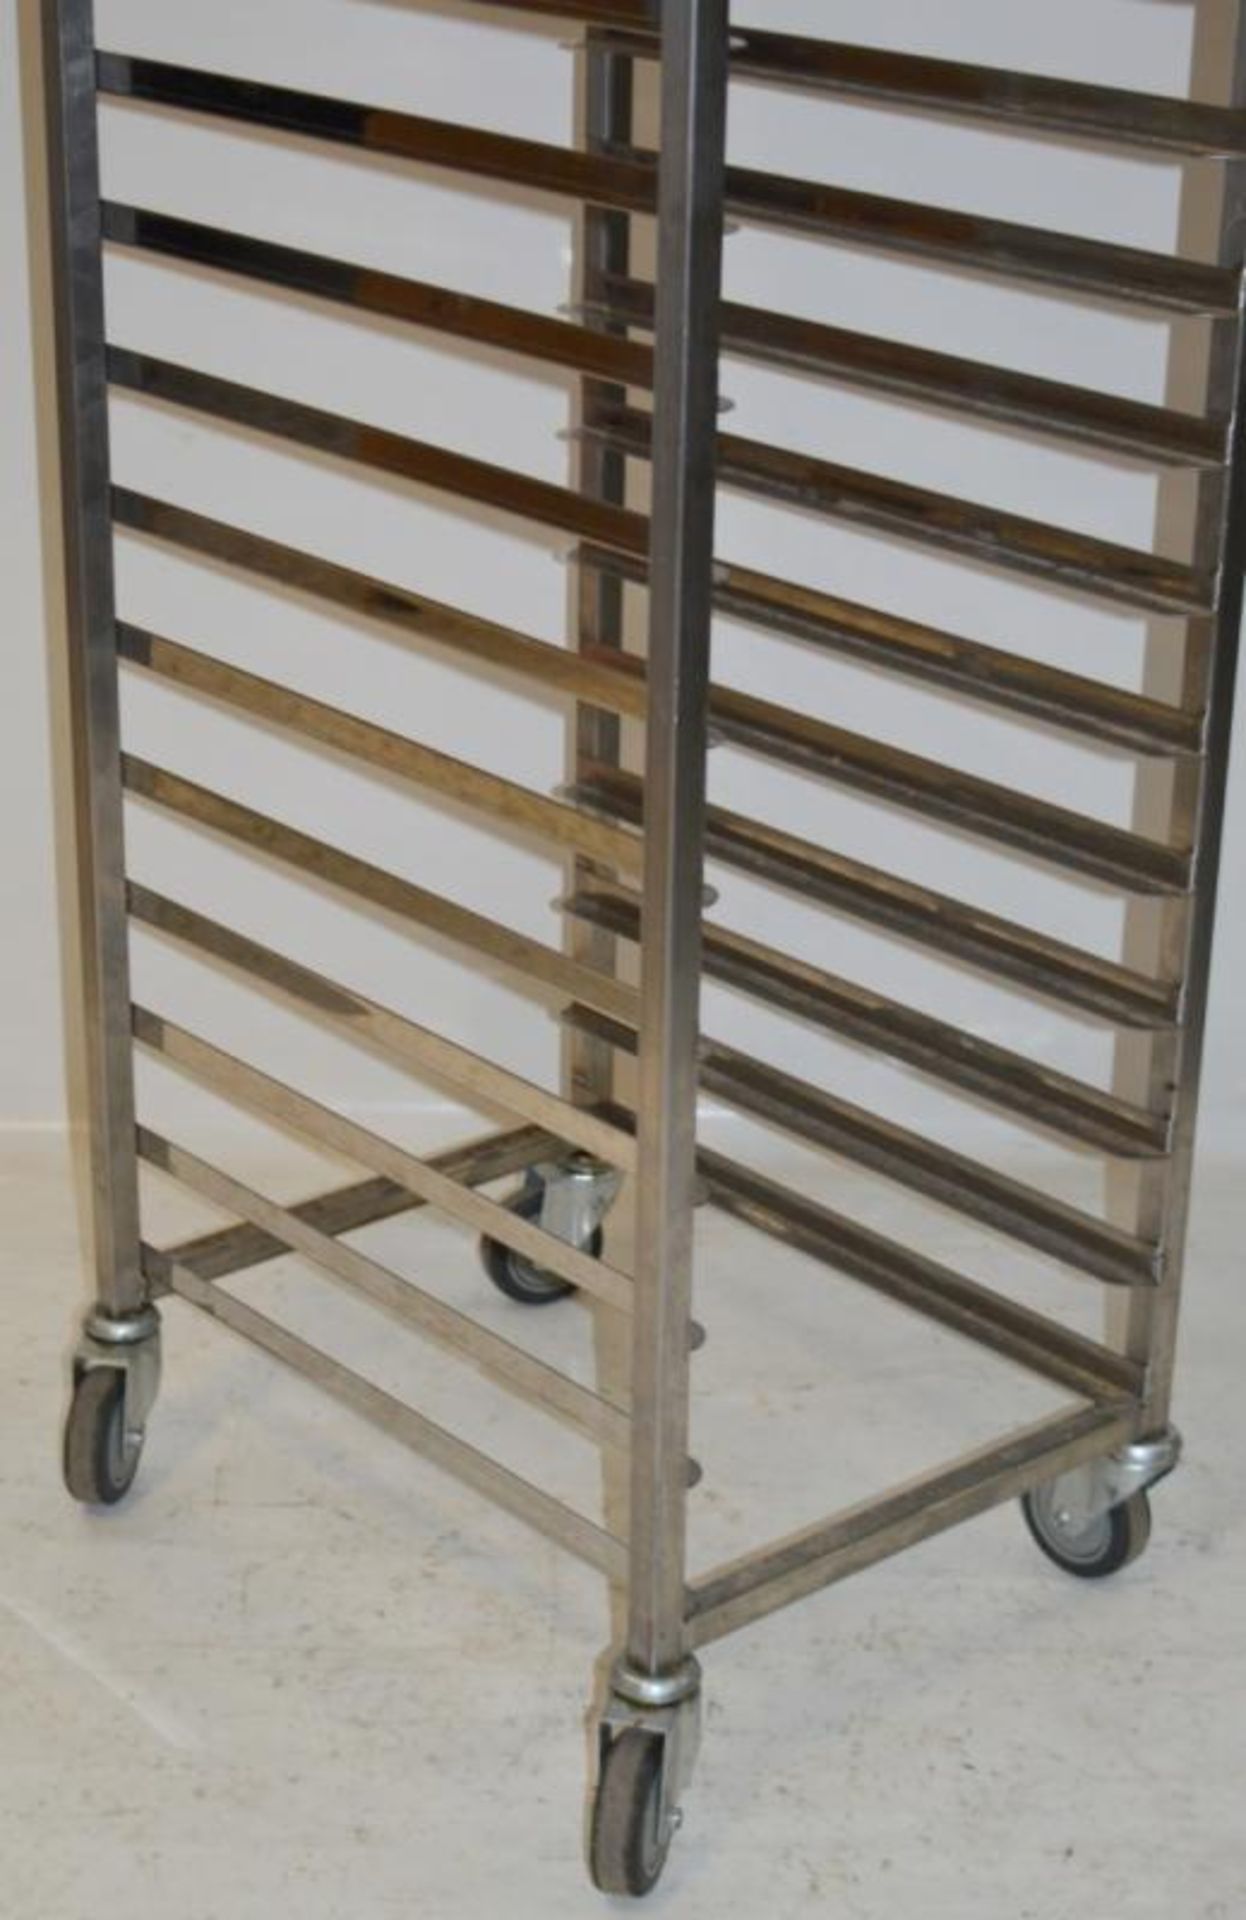 1 x Stainless Steel 18 Tier Mobile Tray Rack - H182 x W46.5 x D60 cms - CL282 - Ref J1279 - Location - Image 4 of 4